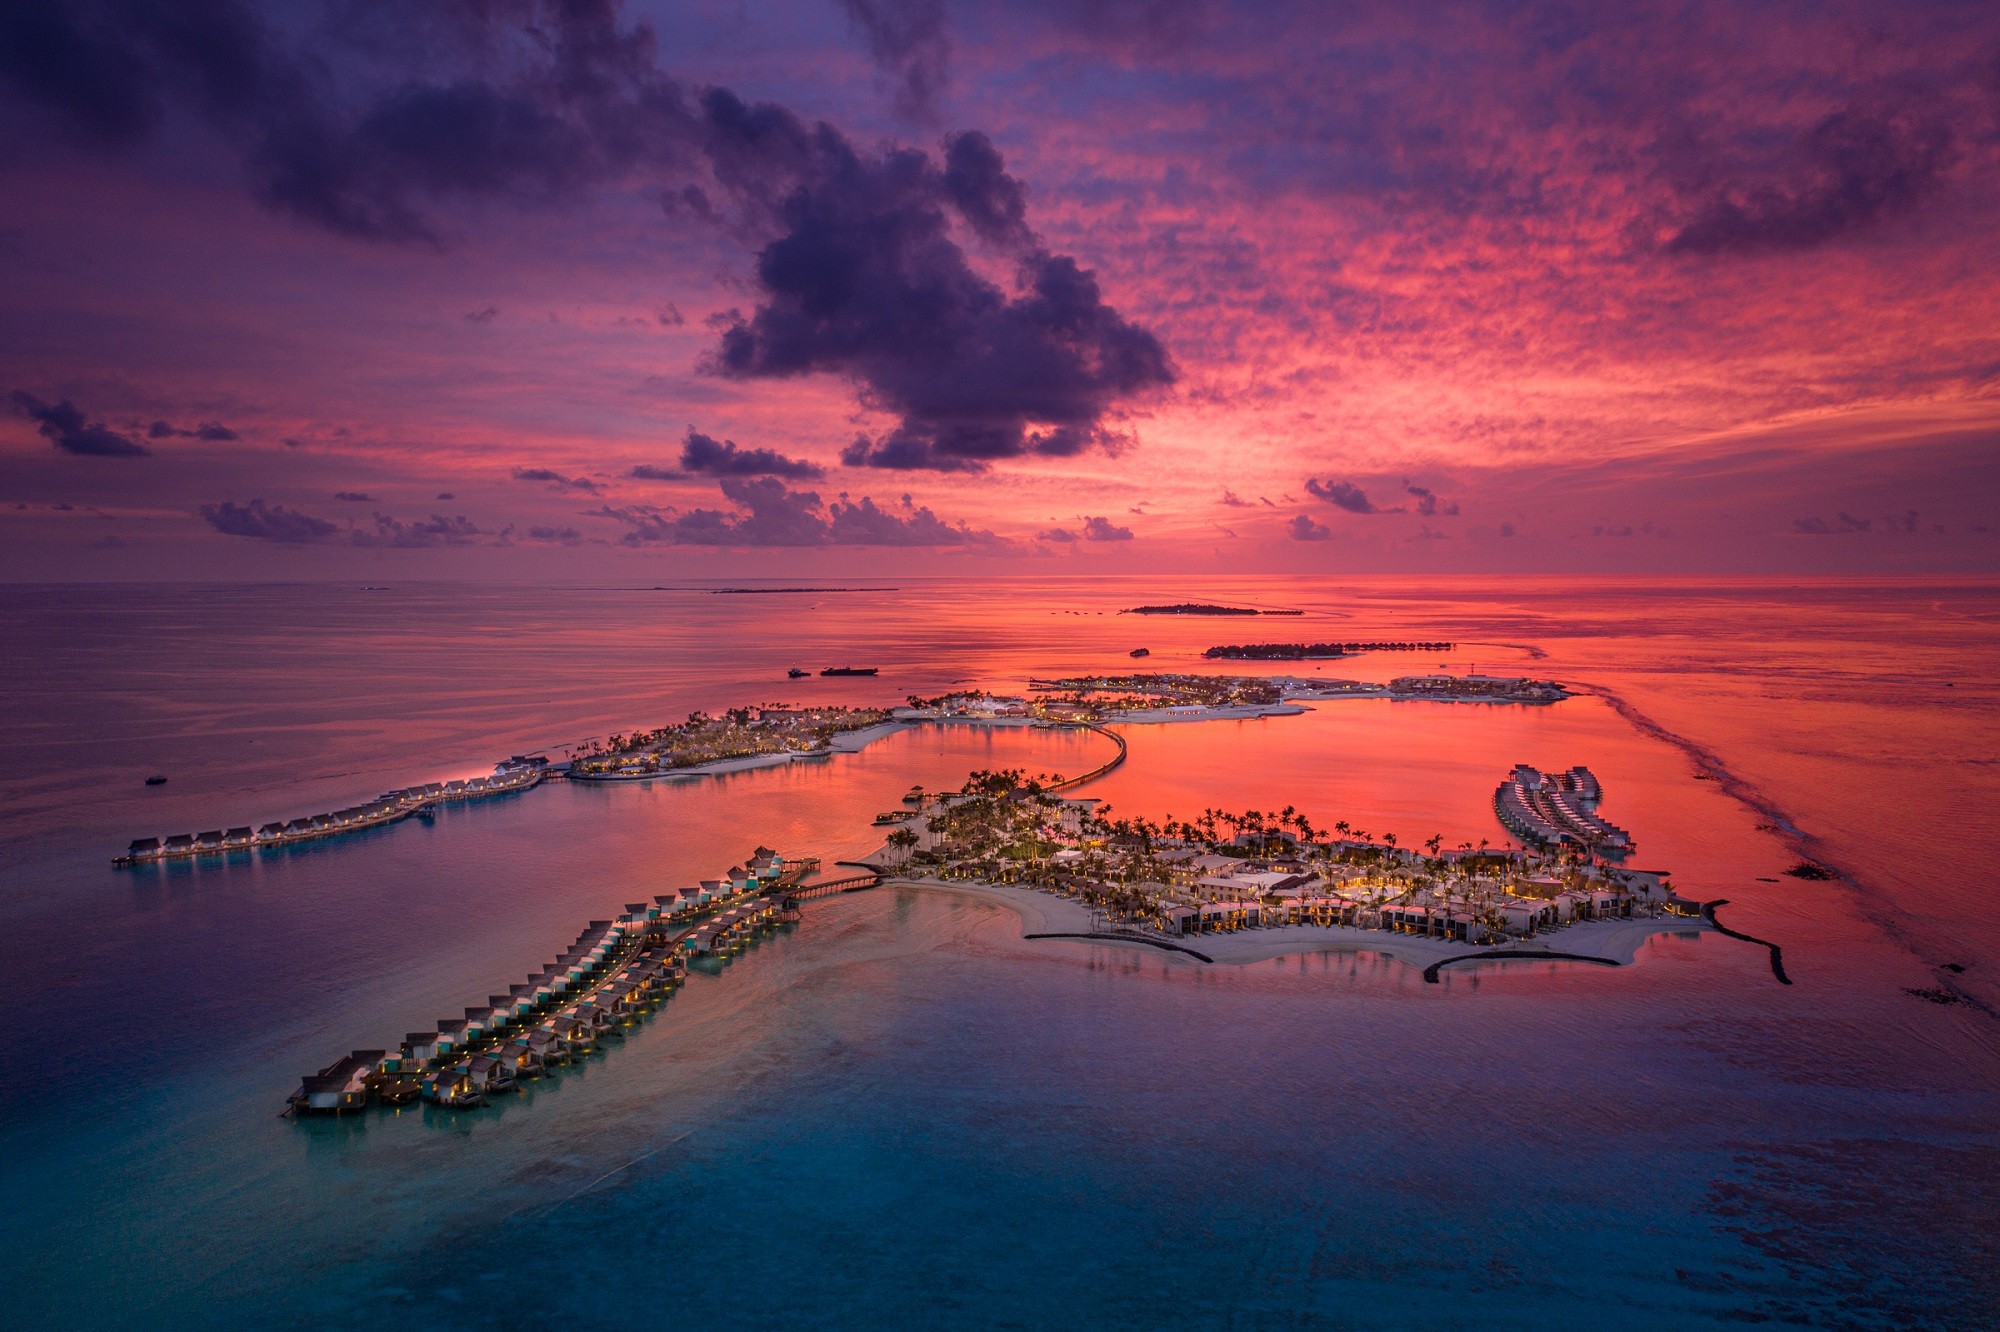 Singha Estate’s CROSSROADS Maldives – the first integrated lifestyle destination in the Indian Ocean nation of Maldives – located just 8km from the capital, Malé, opened in September.